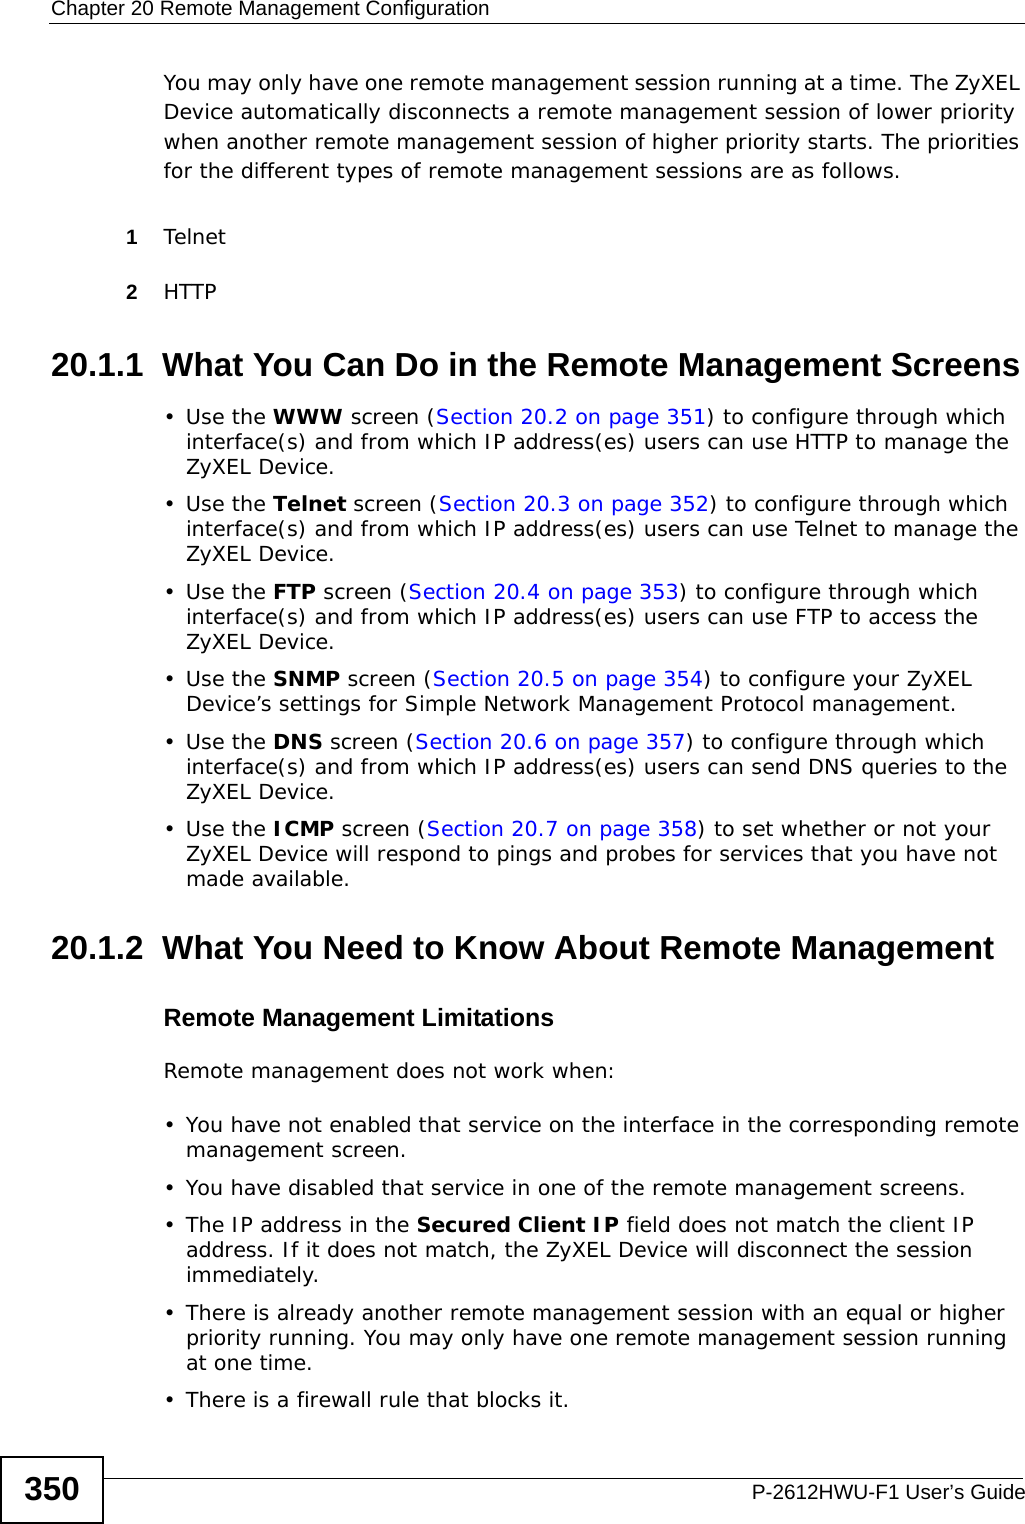 Chapter 20 Remote Management ConfigurationP-2612HWU-F1 User’s Guide350You may only have one remote management session running at a time. The ZyXEL Device automatically disconnects a remote management session of lower priority when another remote management session of higher priority starts. The priorities for the different types of remote management sessions are as follows.1Telnet2HTTP20.1.1  What You Can Do in the Remote Management Screens•Use the WWW screen (Section 20.2 on page 351) to configure through which interface(s) and from which IP address(es) users can use HTTP to manage the ZyXEL Device.•Use the Telnet screen (Section 20.3 on page 352) to configure through which interface(s) and from which IP address(es) users can use Telnet to manage the ZyXEL Device.•Use the FTP screen (Section 20.4 on page 353) to configure through which interface(s) and from which IP address(es) users can use FTP to access the ZyXEL Device.•Use the SNMP screen (Section 20.5 on page 354) to configure your ZyXEL Device’s settings for Simple Network Management Protocol management.•Use the DNS screen (Section 20.6 on page 357) to configure through which interface(s) and from which IP address(es) users can send DNS queries to the ZyXEL Device.•Use the ICMP screen (Section 20.7 on page 358) to set whether or not your ZyXEL Device will respond to pings and probes for services that you have not made available.20.1.2  What You Need to Know About Remote ManagementRemote Management LimitationsRemote management does not work when:• You have not enabled that service on the interface in the corresponding remote management screen.• You have disabled that service in one of the remote management screens.• The IP address in the Secured Client IP field does not match the client IP address. If it does not match, the ZyXEL Device will disconnect the session immediately.• There is already another remote management session with an equal or higher priority running. You may only have one remote management session running at one time.• There is a firewall rule that blocks it.